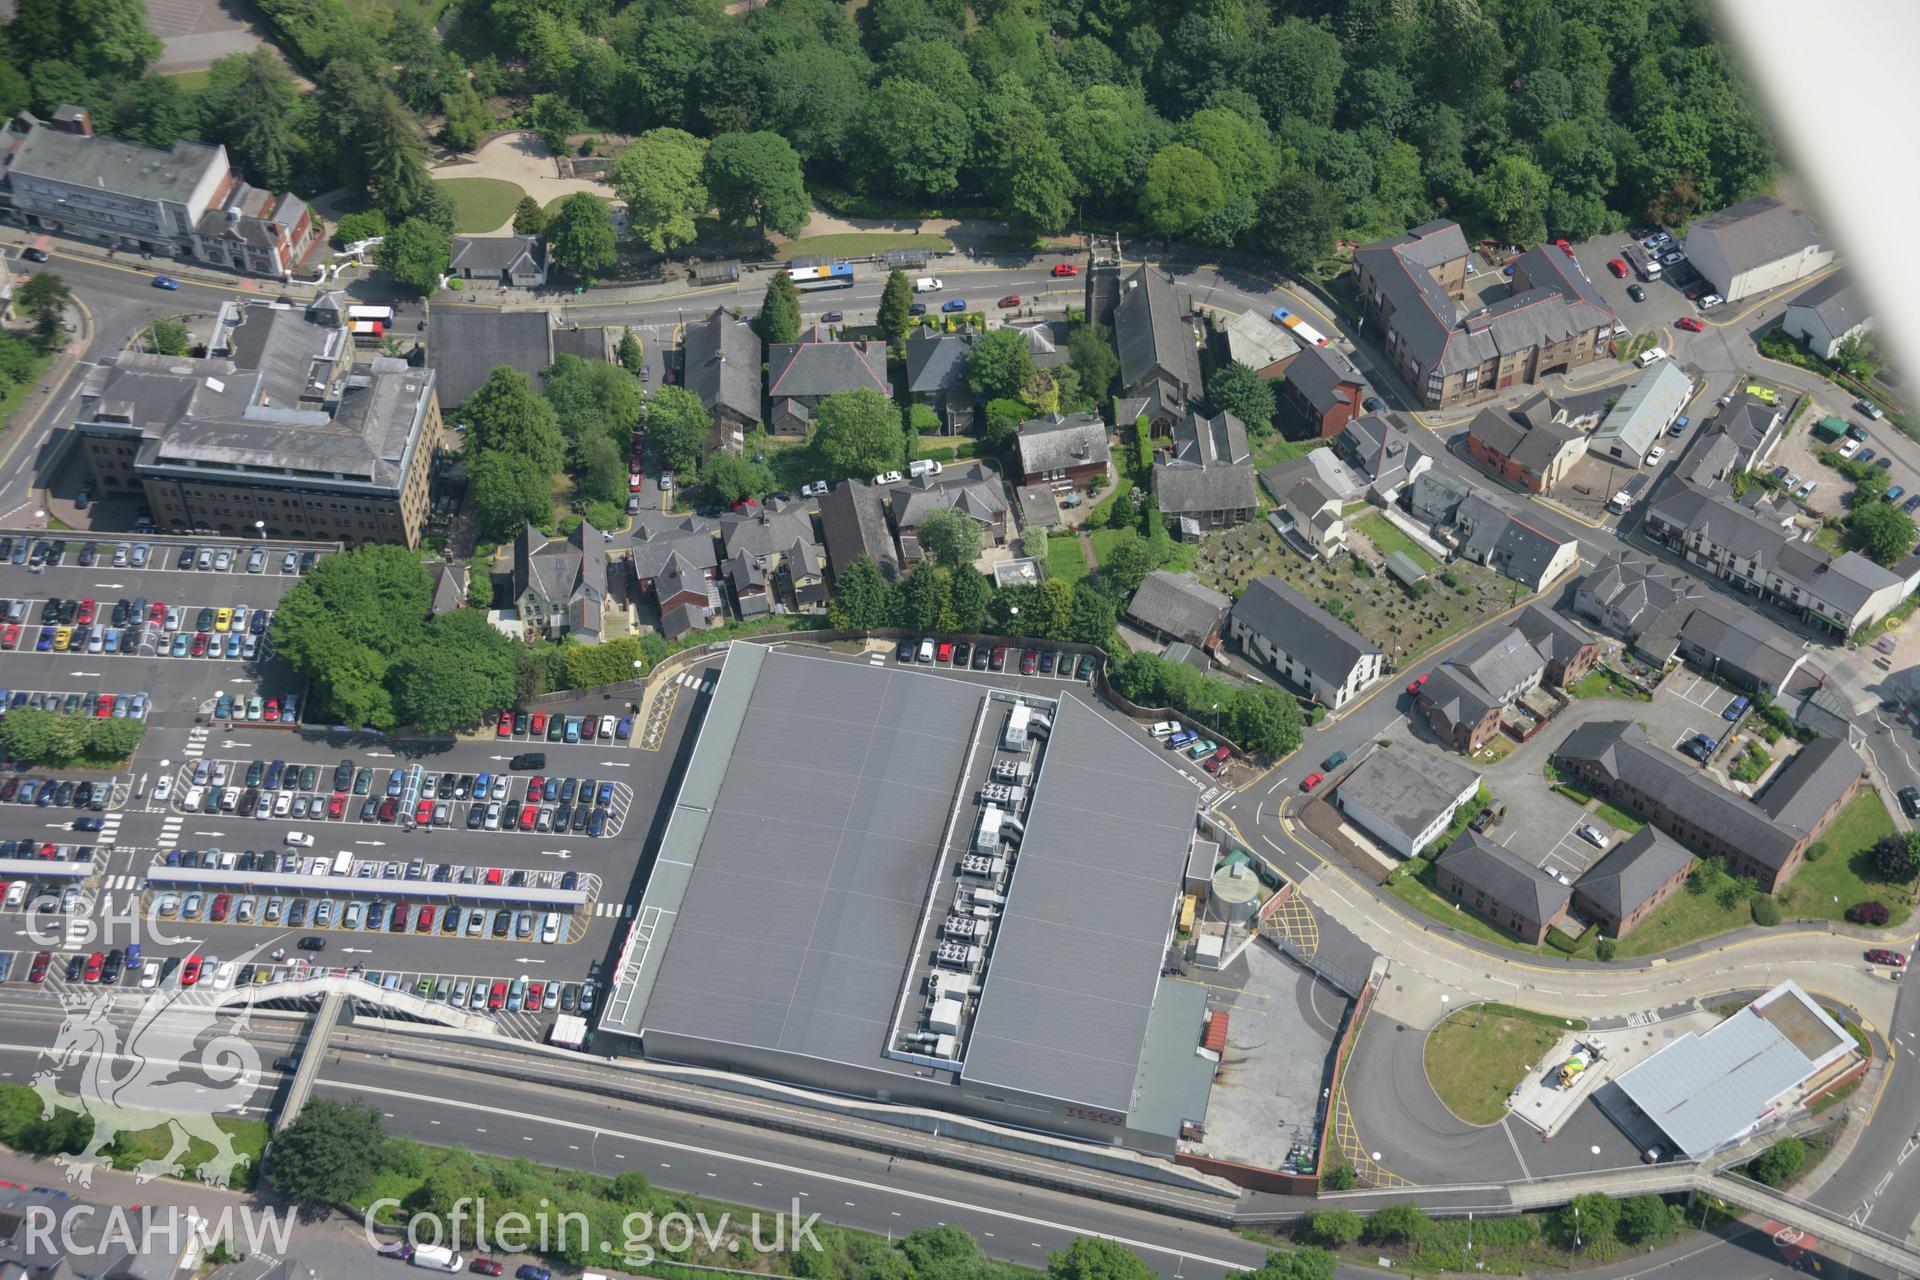 RCAHMW colour oblique aerial photograph of Pontypool from the west showing the town centre and supermarket. Taken on 09 June 2006 by Toby Driver.